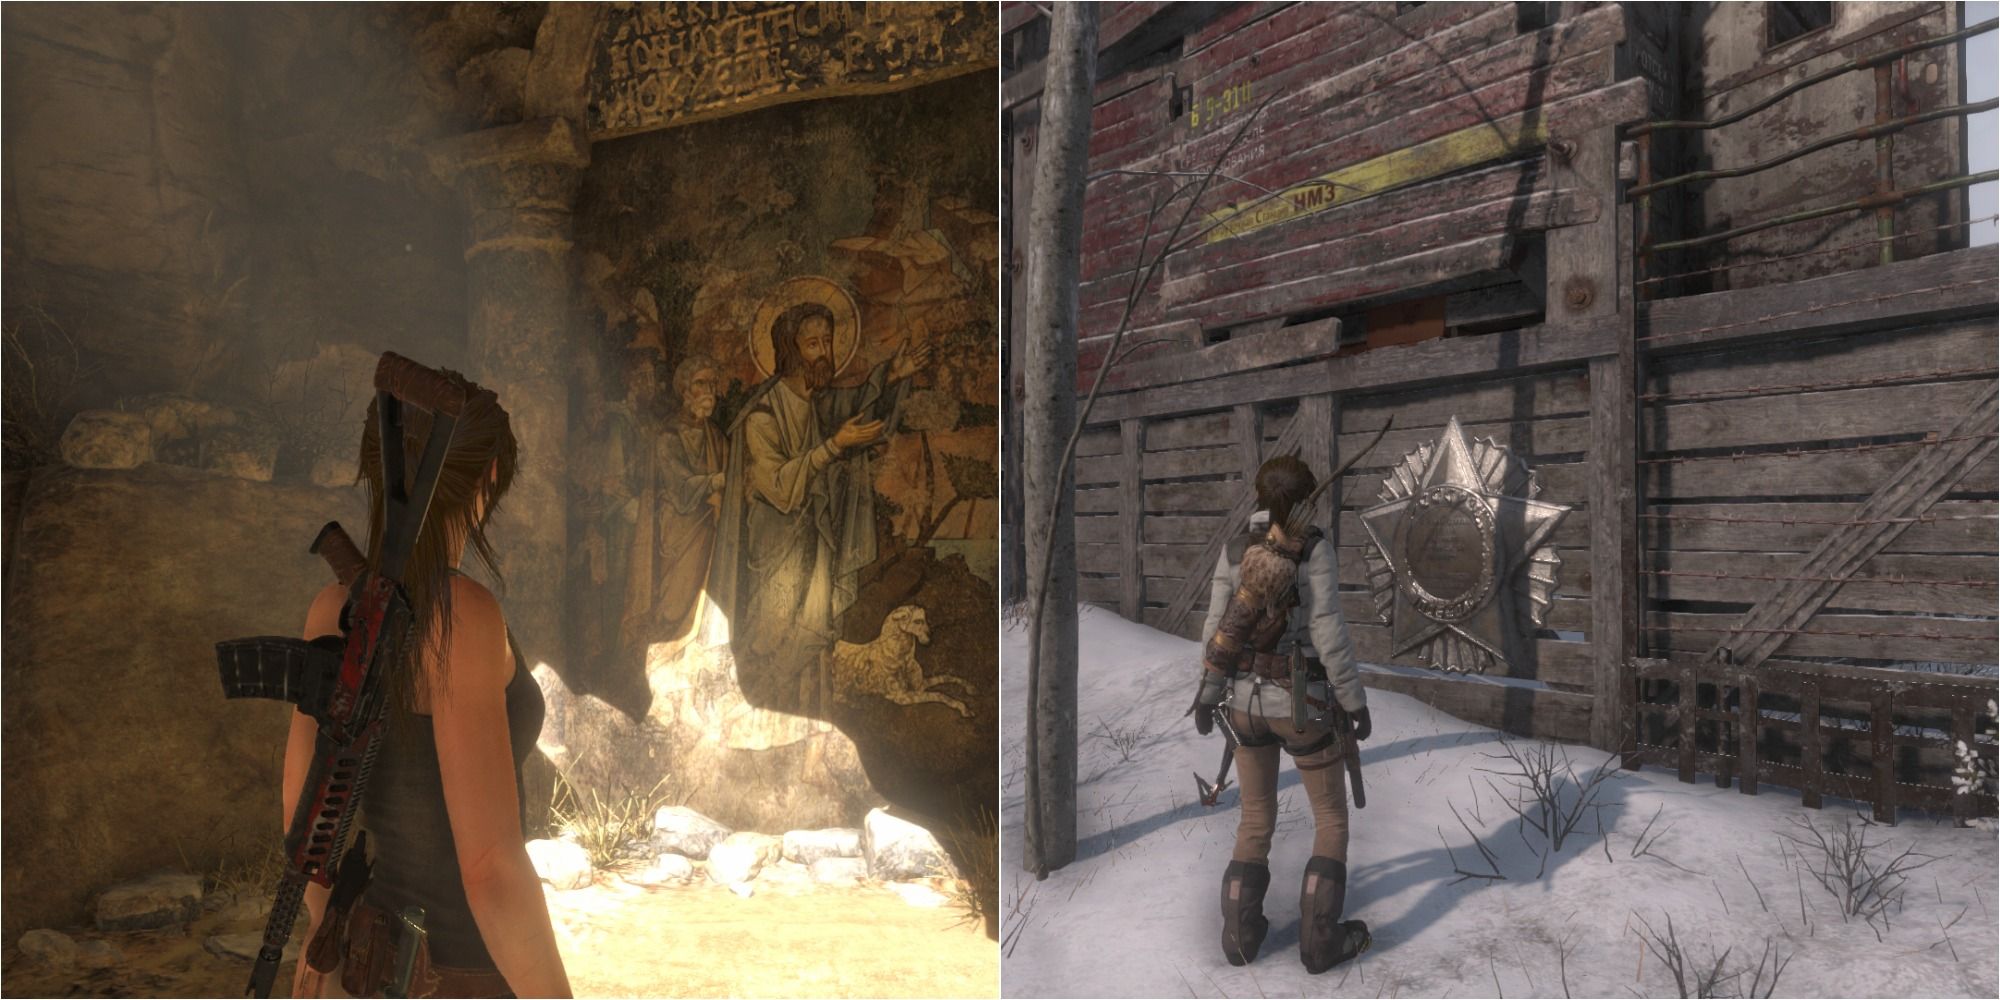 Rise of the Tomb Raider relic, mural, and document locations guide